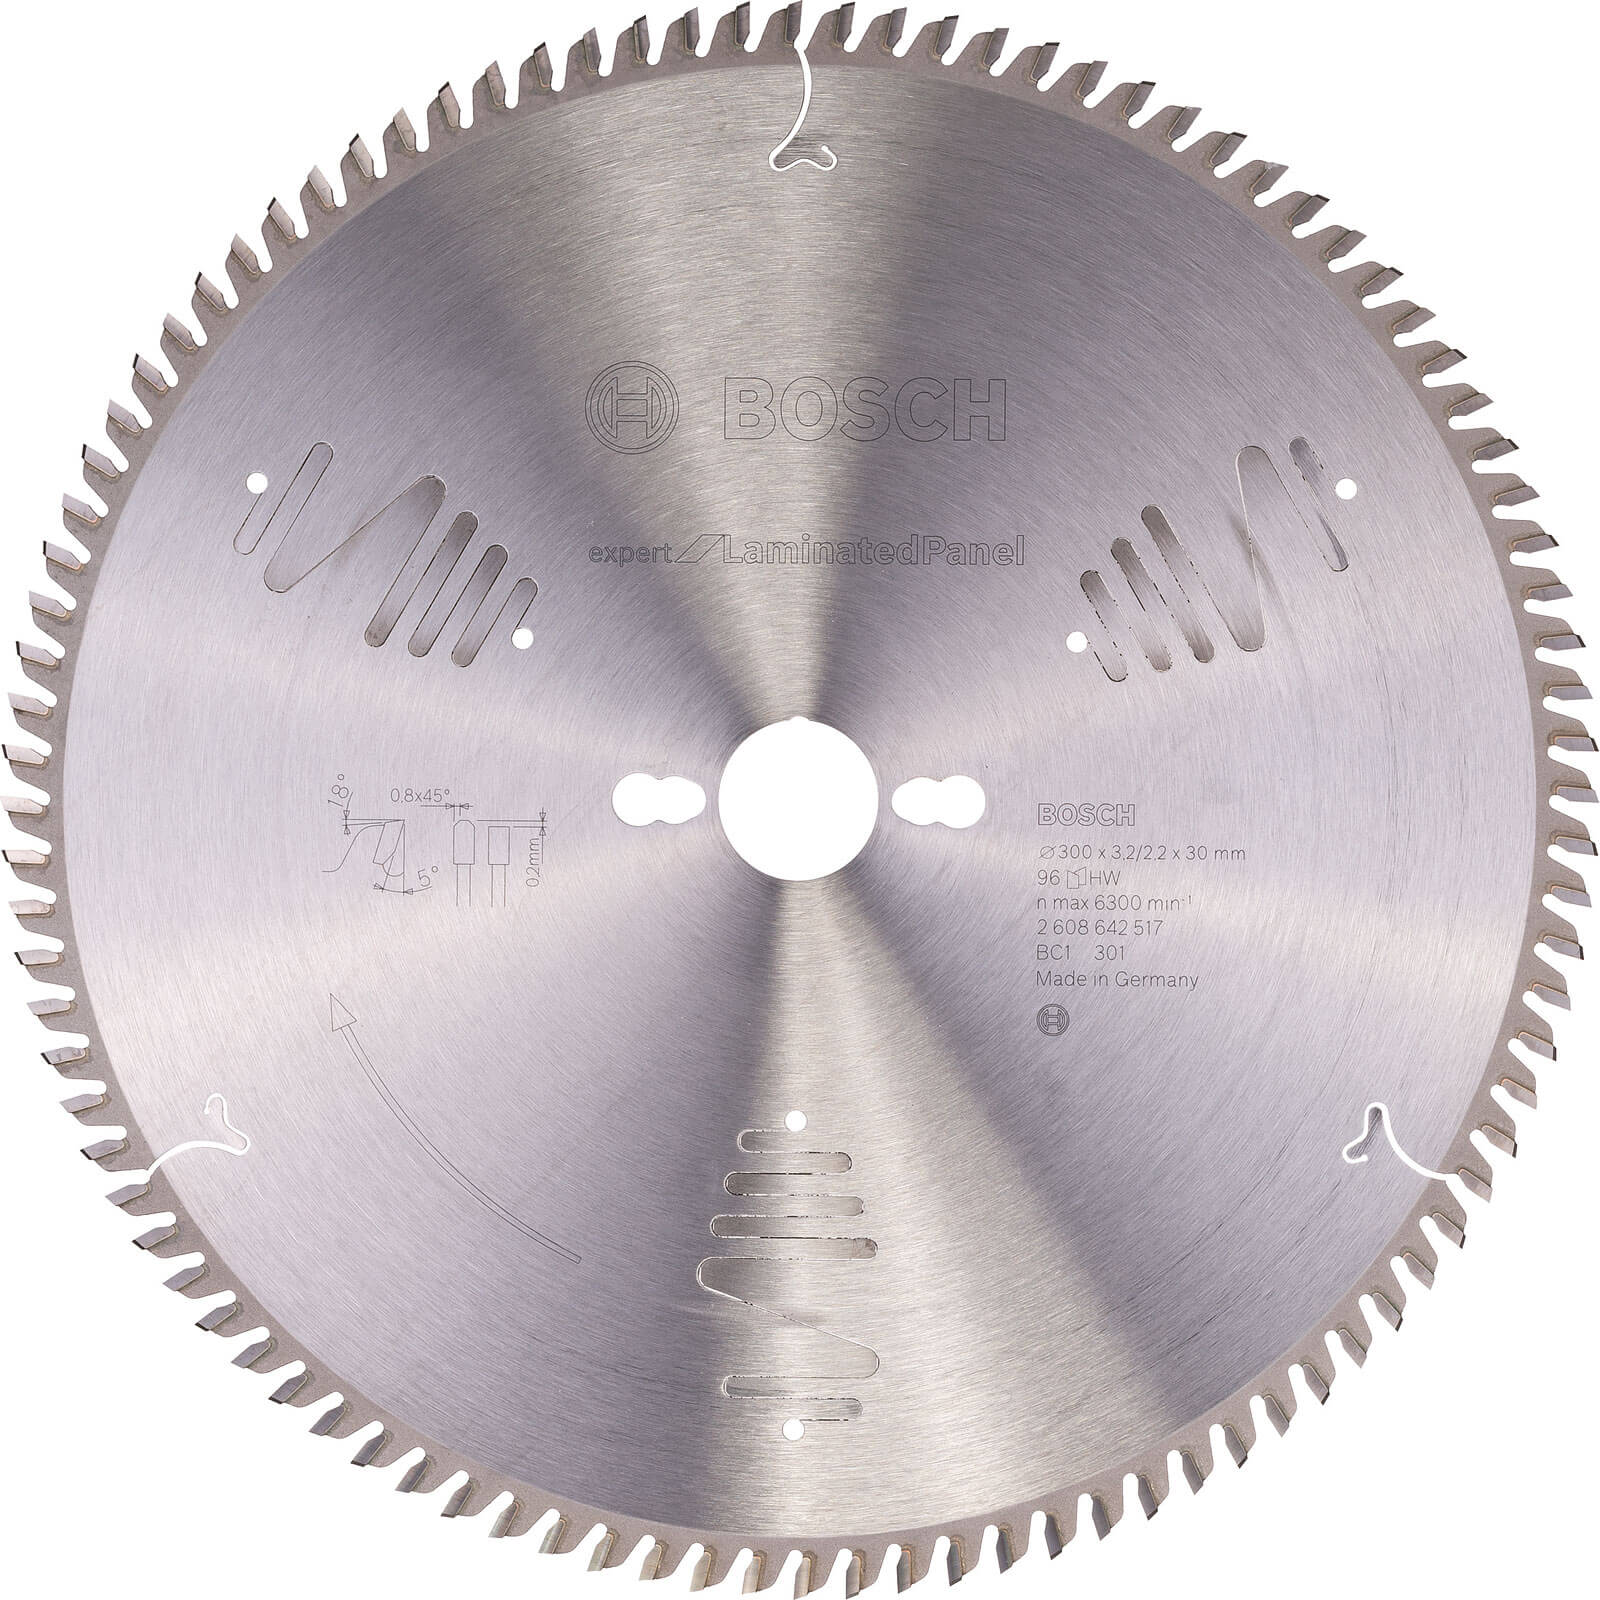 Photo of Bosch Expert Fine Cut Table Saw Blade For Laminated Panel 300mm 96t 30mm